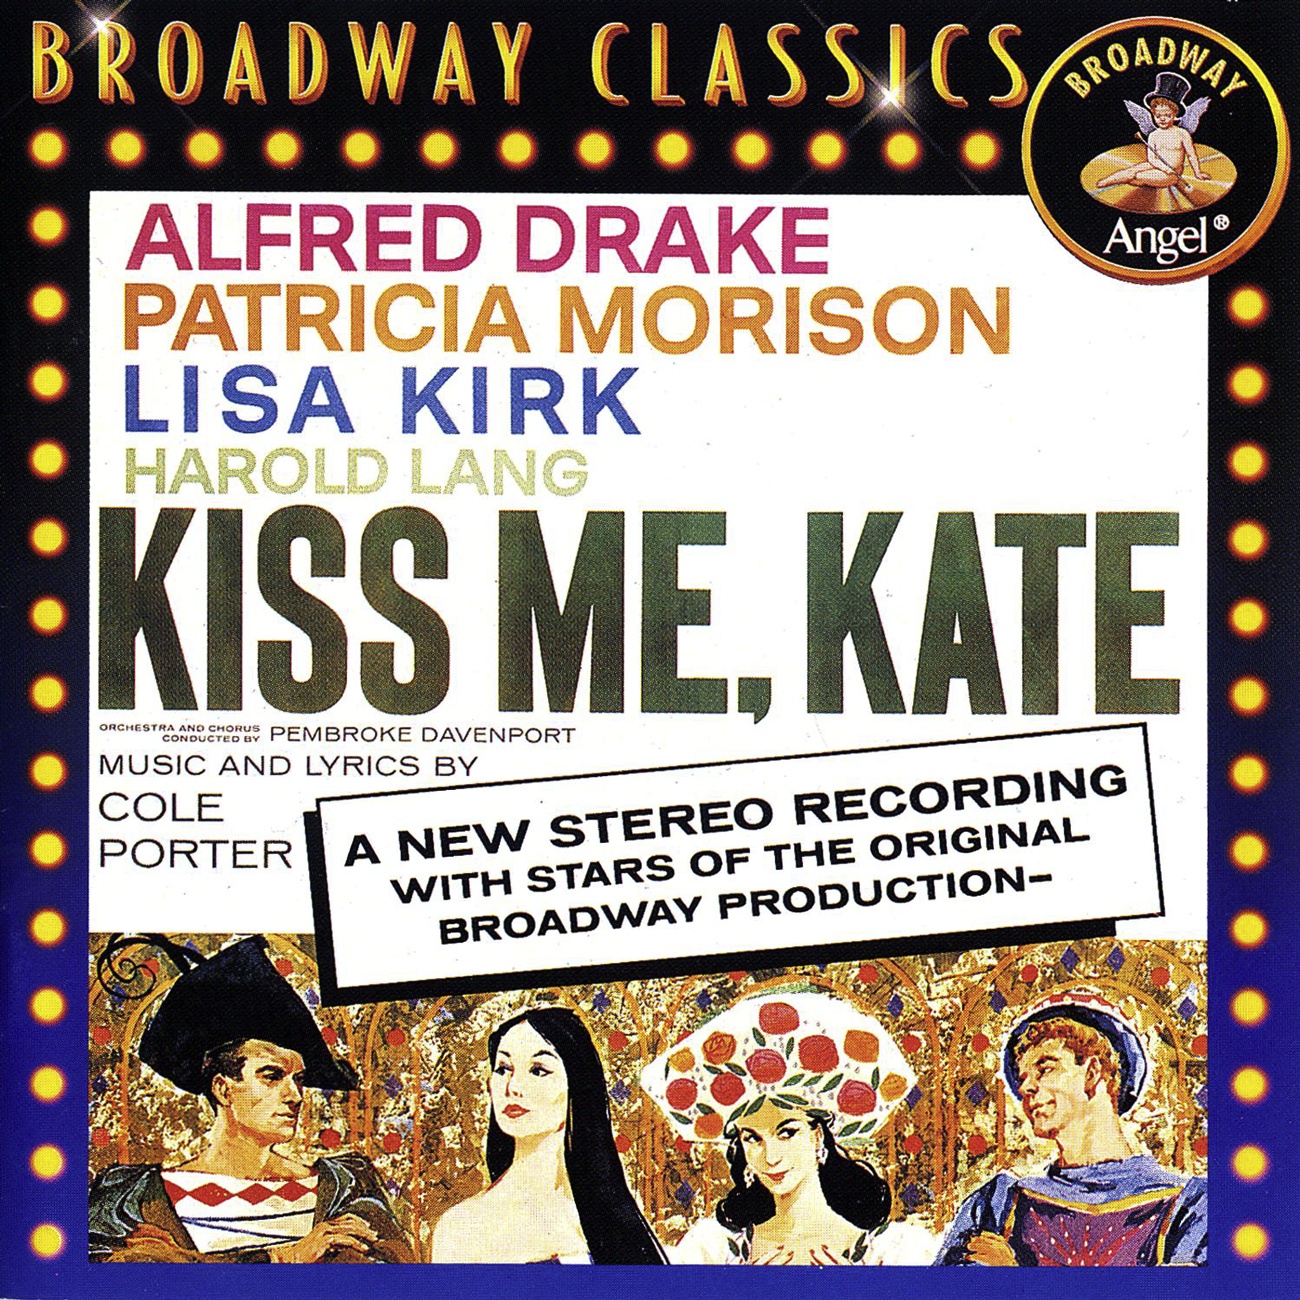 Were Thine That Special Face (Kiss Me Kate)